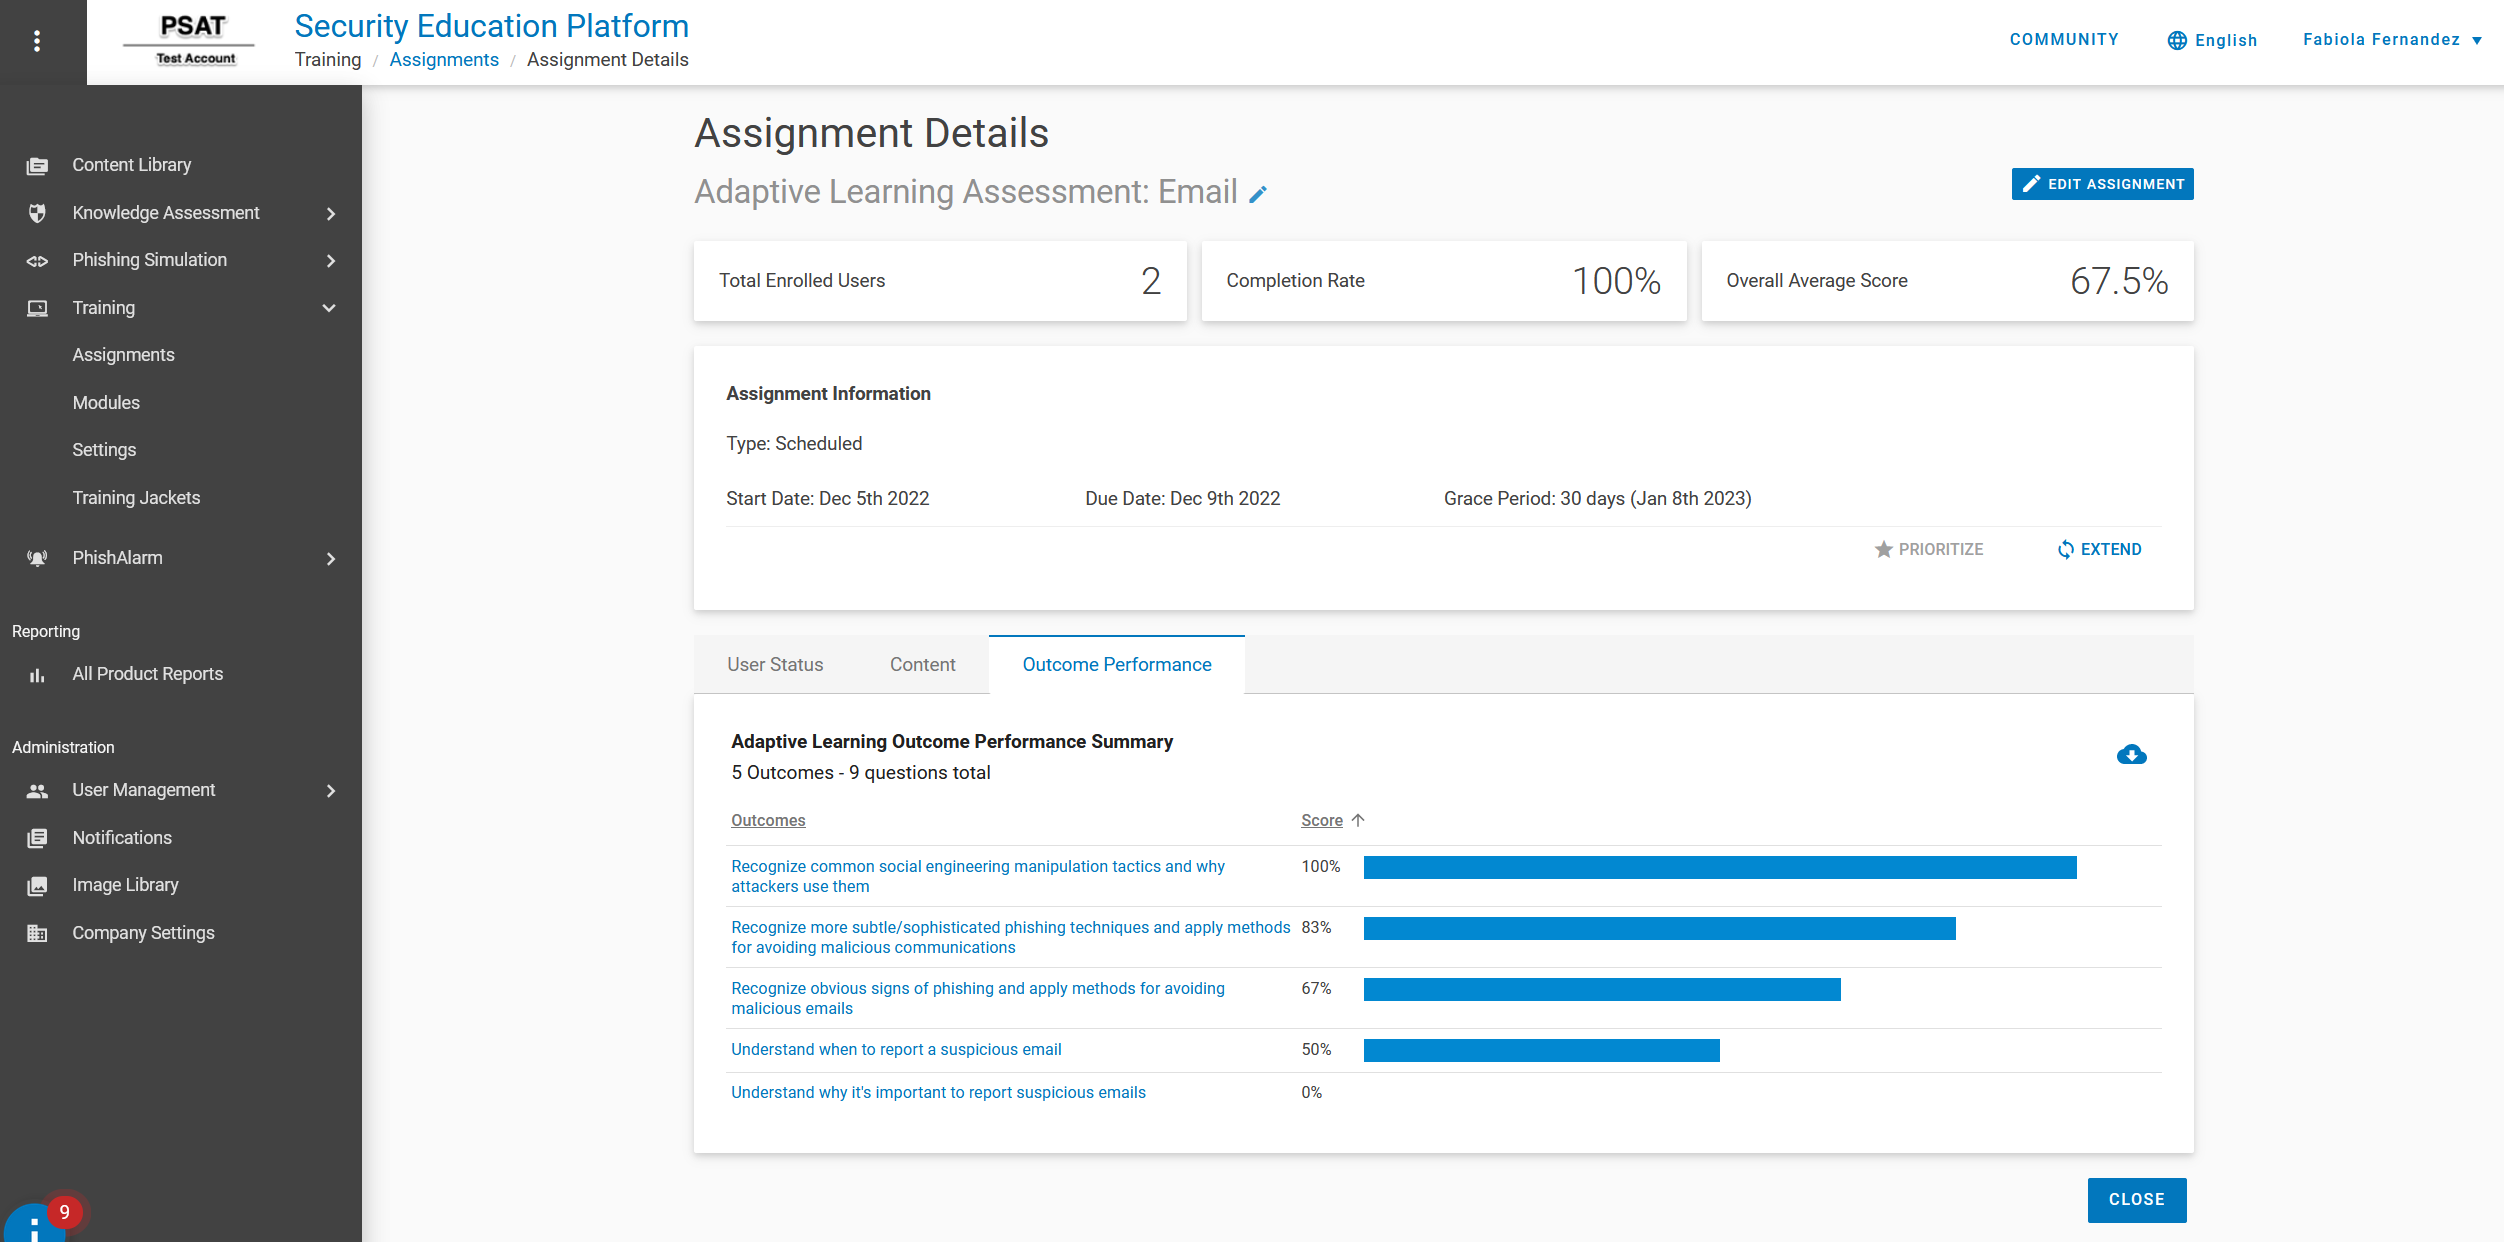 Adaptive Learning Assessments